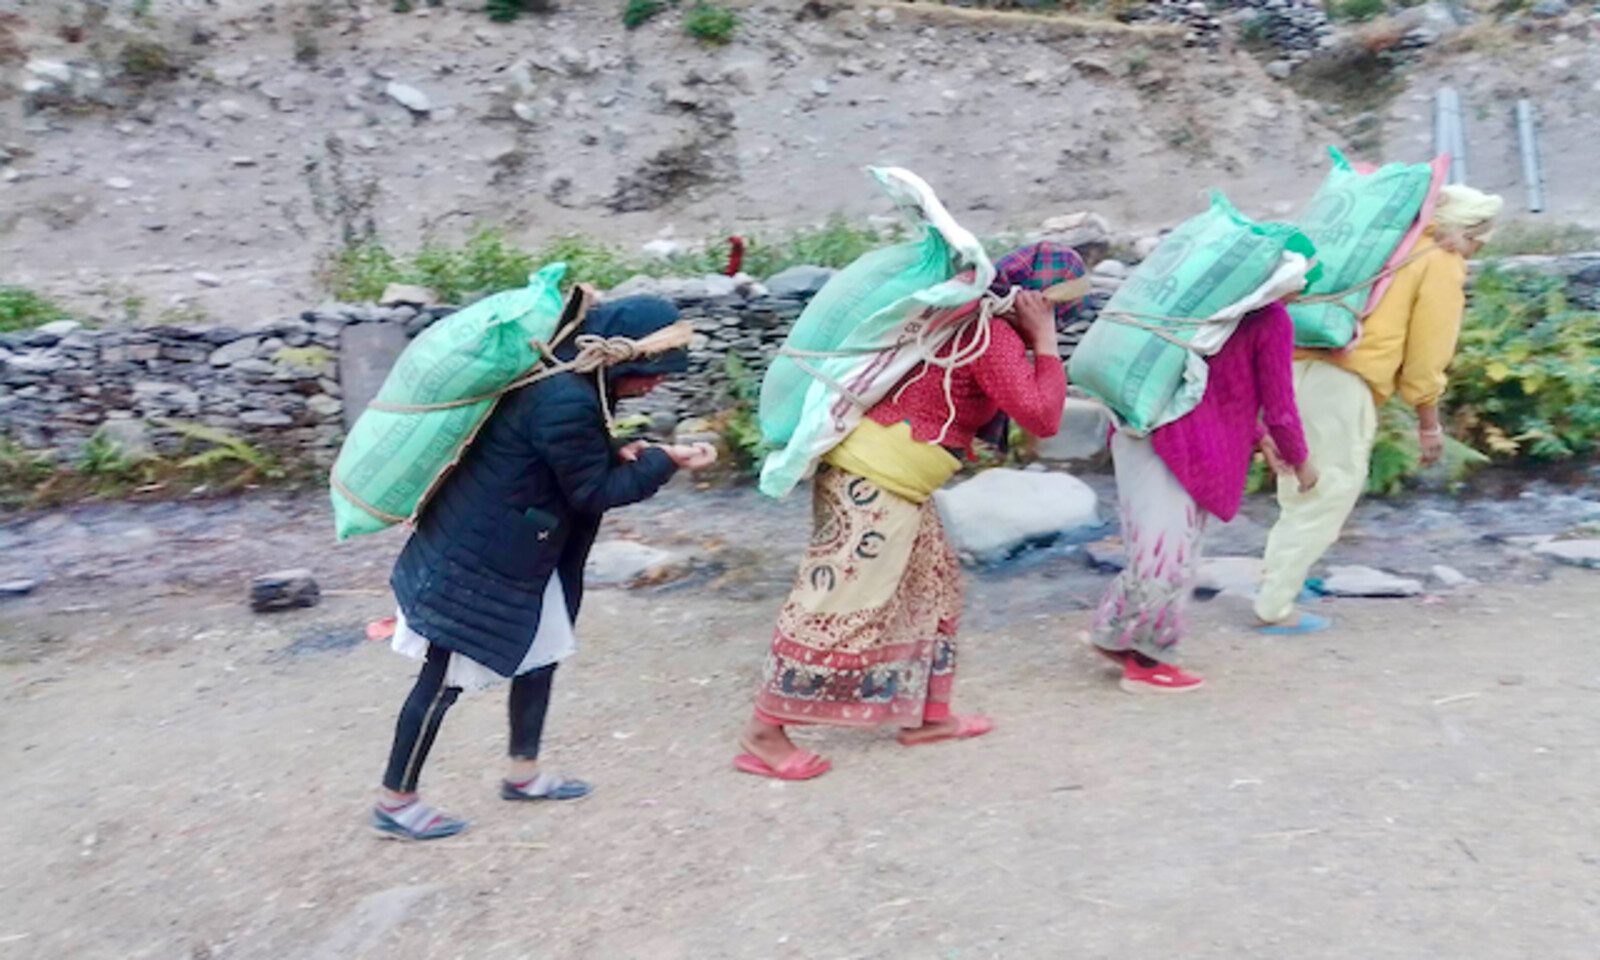 Nepali women carry 50kg bags of cement to help build a Birth Centre in the remote community of Aathbiskot, West Rukum, Nepal